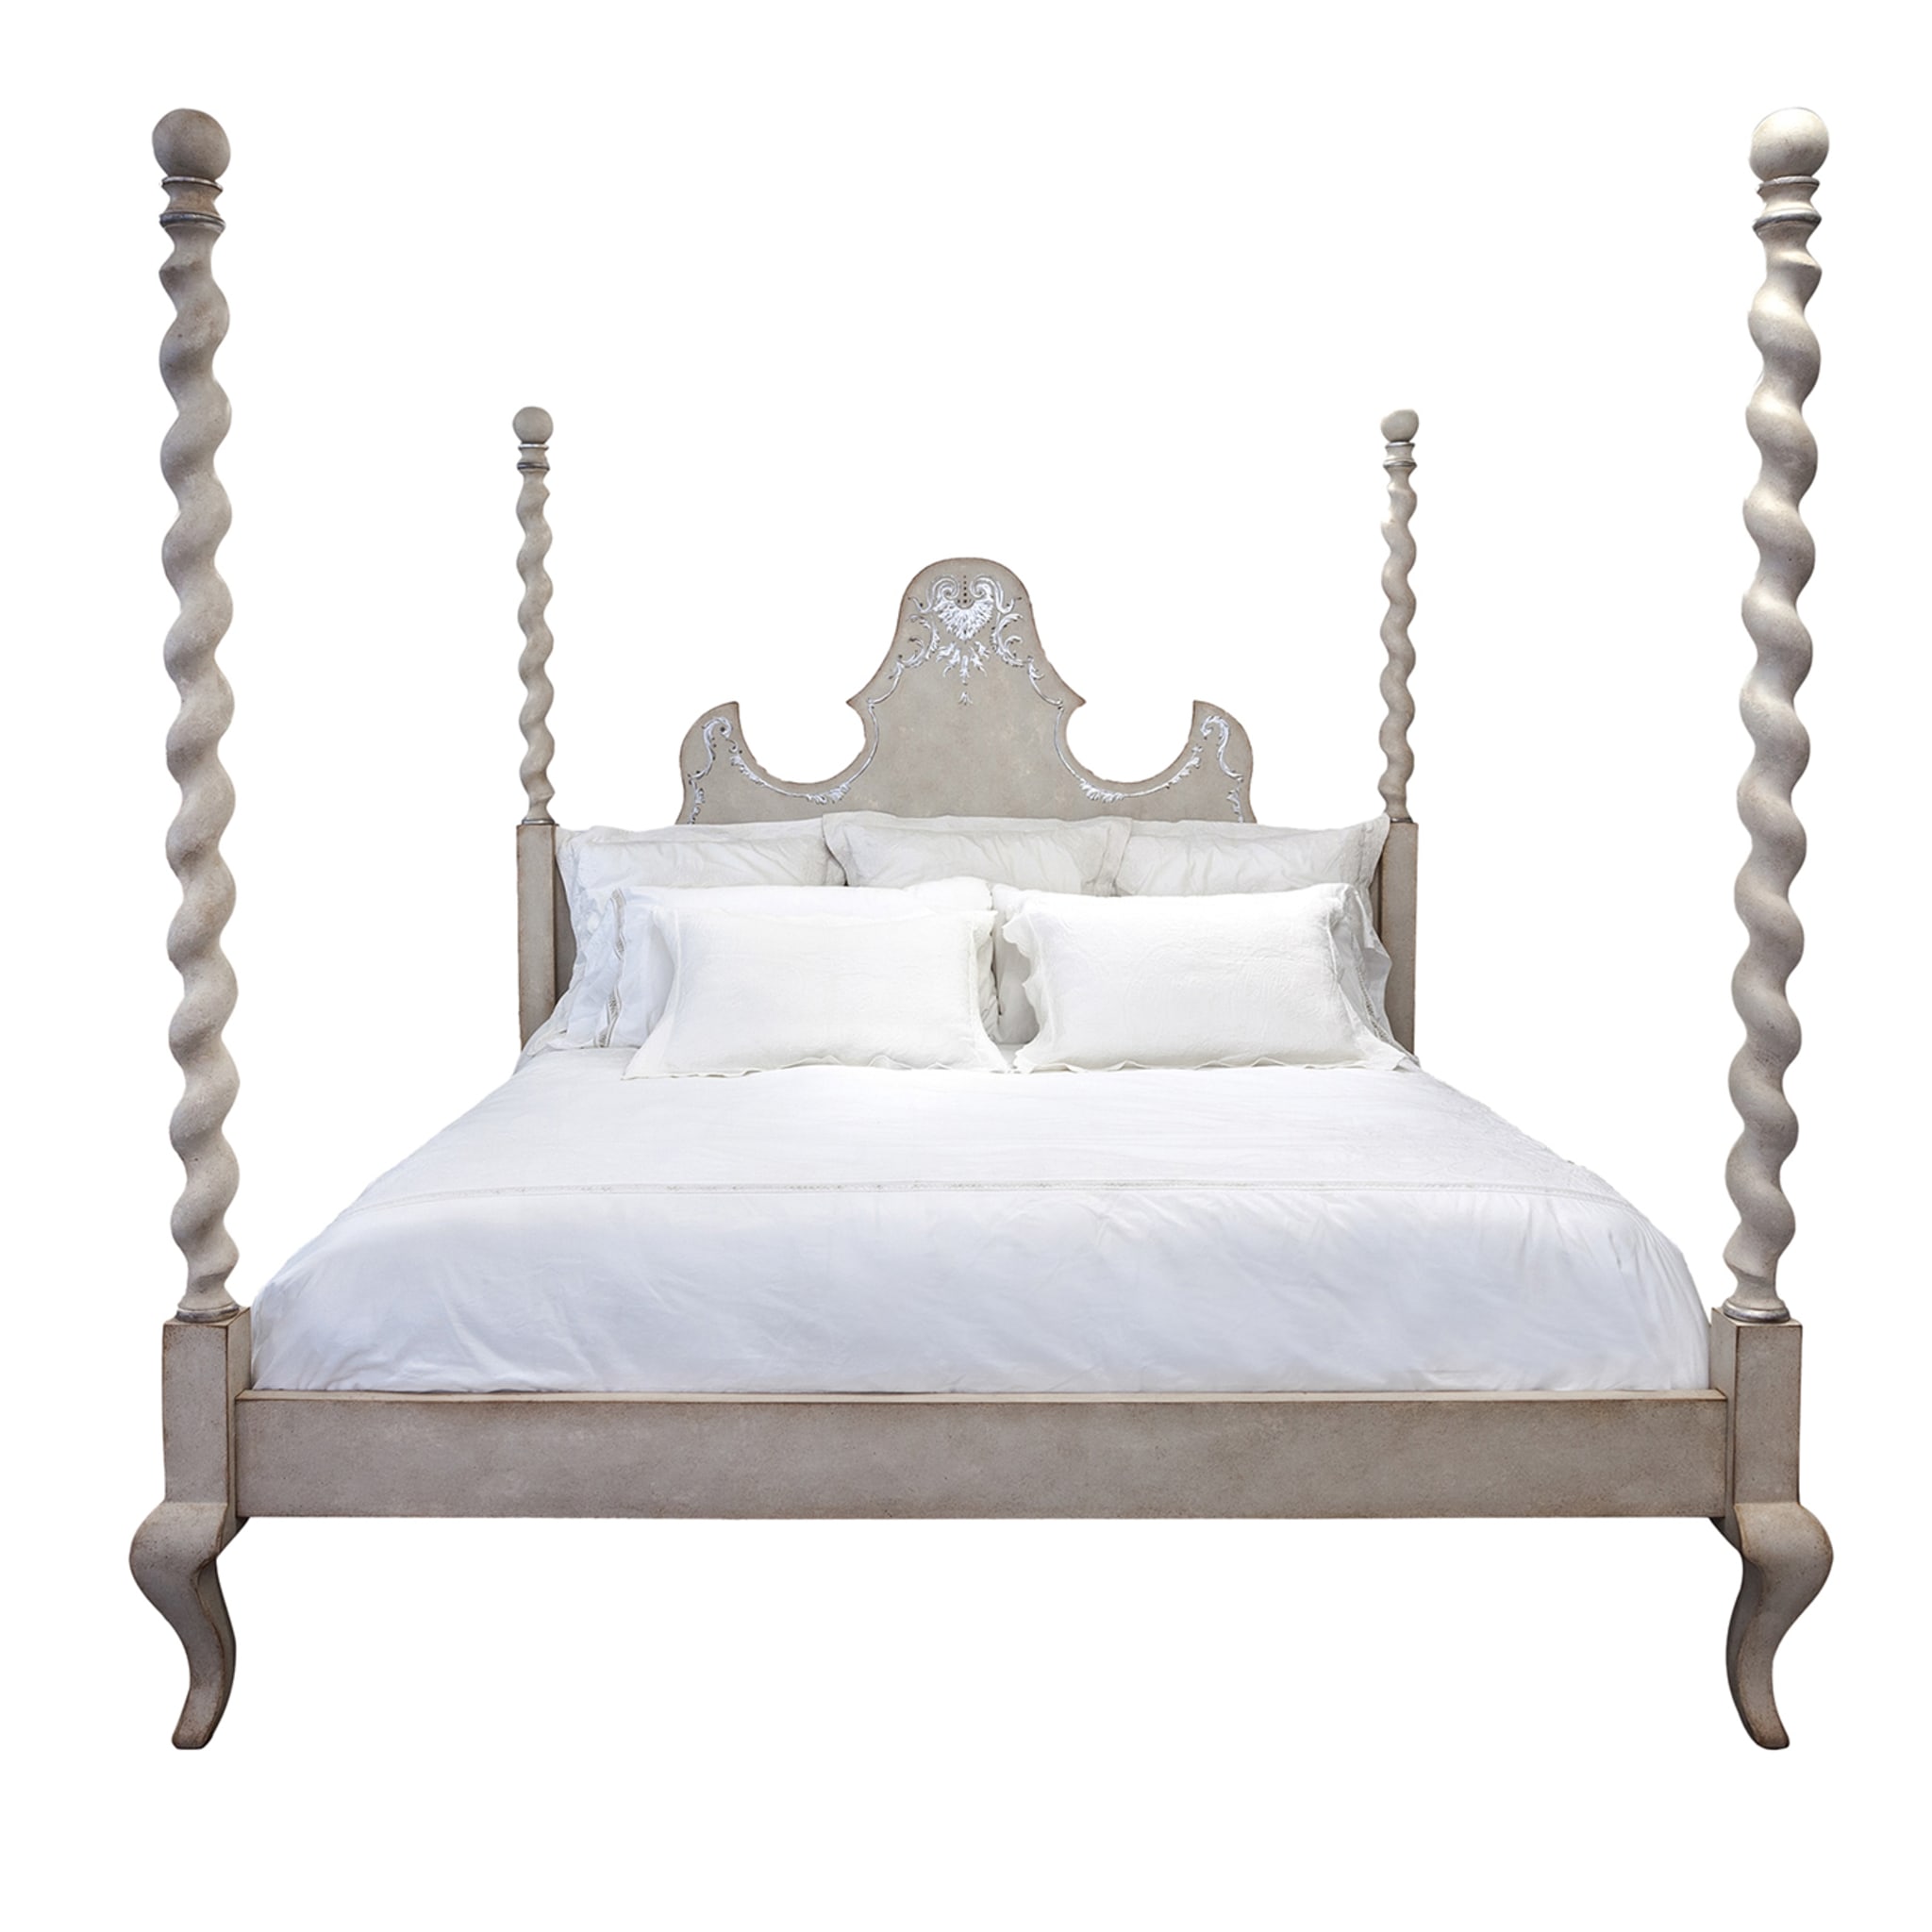 Giotto Silver Textural Decorations King Size Bed - Main view